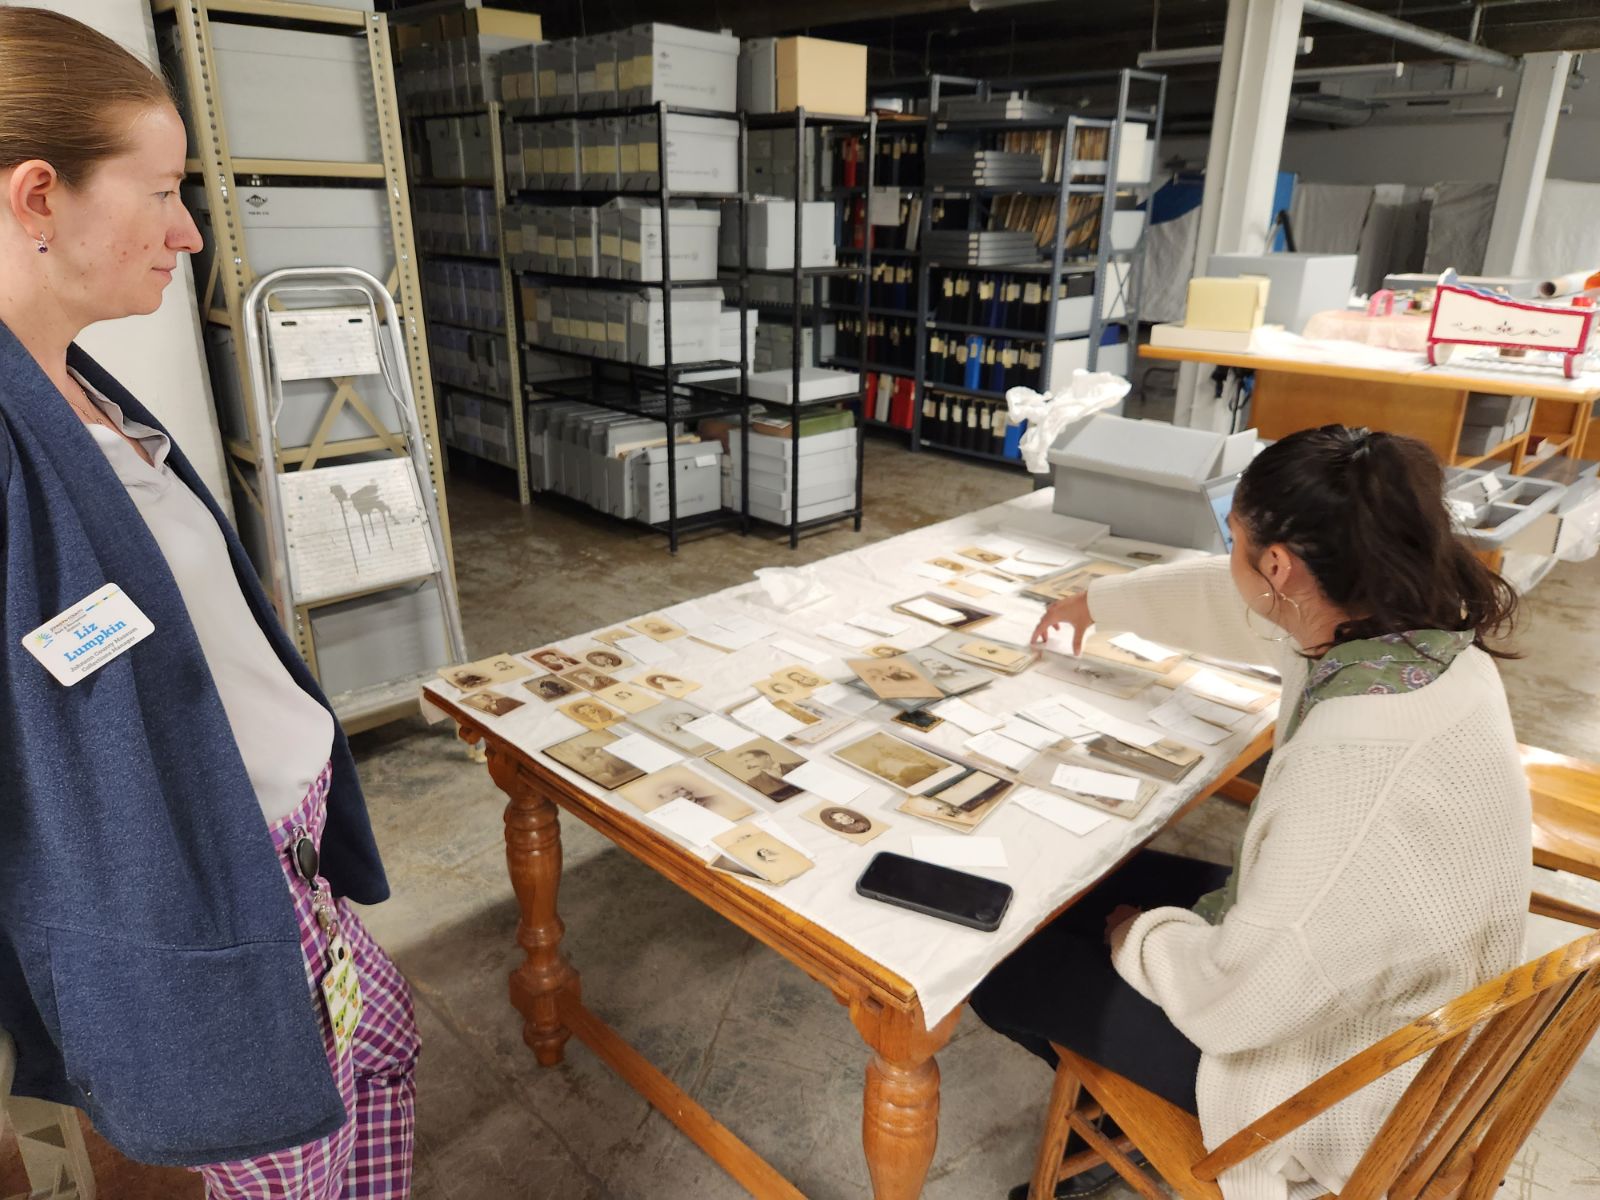 Collections Manager Liz Lumpkin and Emerging Museum Professional Intern Jessica Sapien reviewing historical photographs in the Museum’s collection storage room after updating their database information.